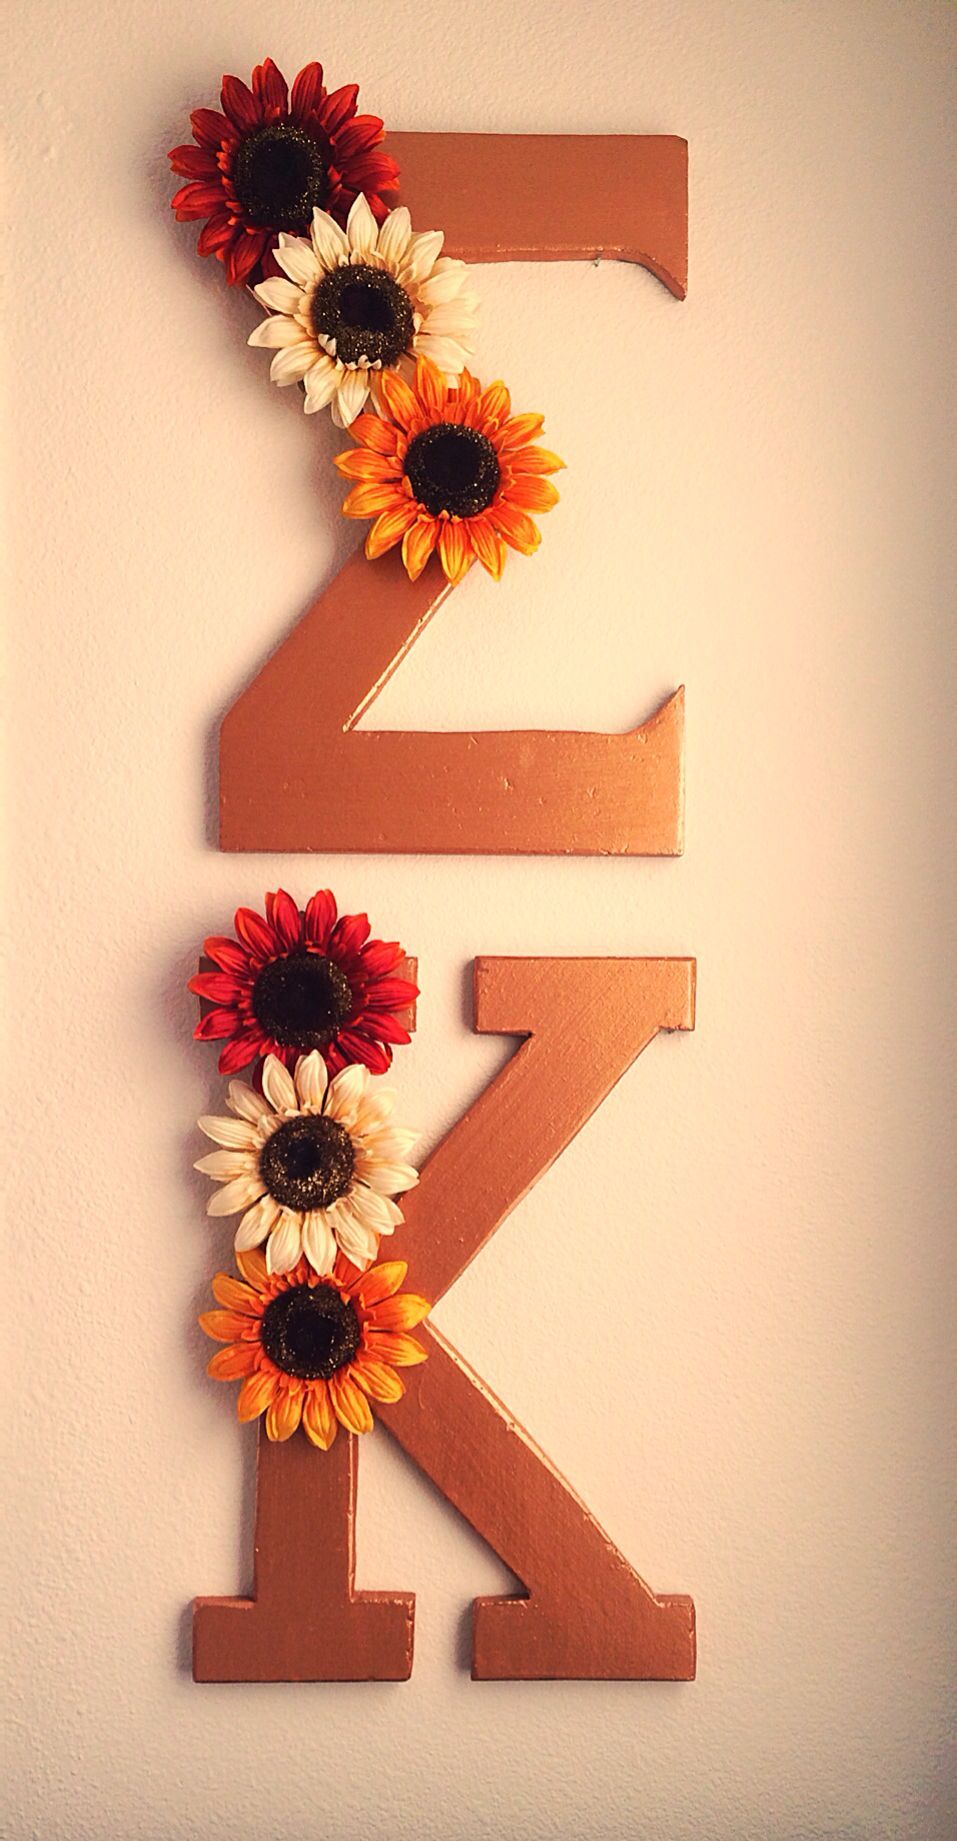 Floral rustic gold letters #sigmakappa -   22 sorority crafts floral
 ideas